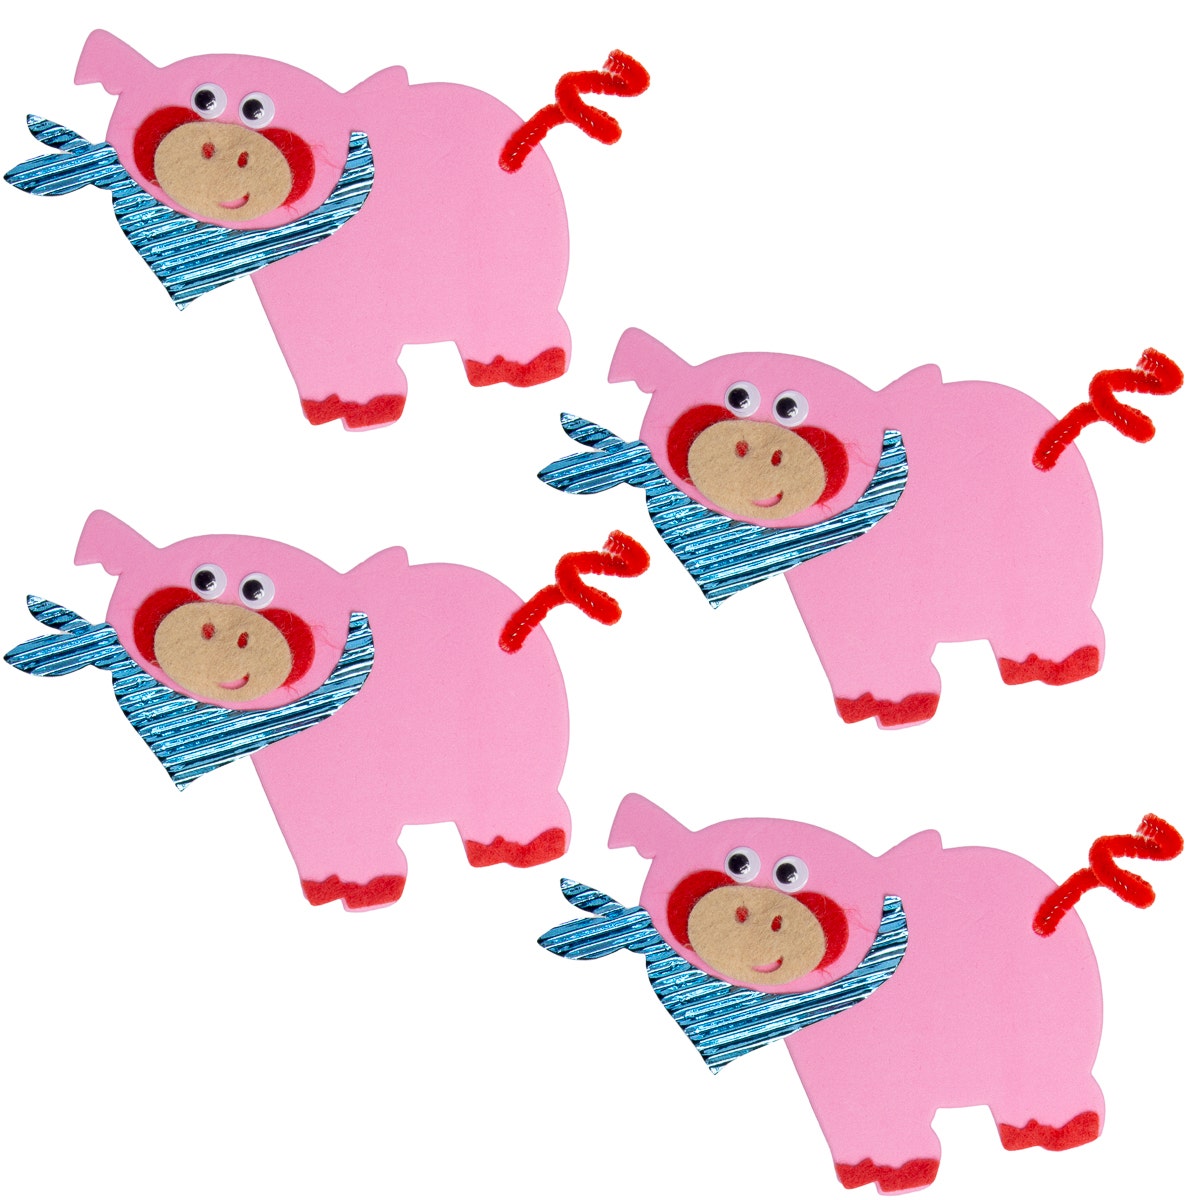 8pk Pig Foam Stickers with Googly Eyes - Makes 32 Pigs Total!